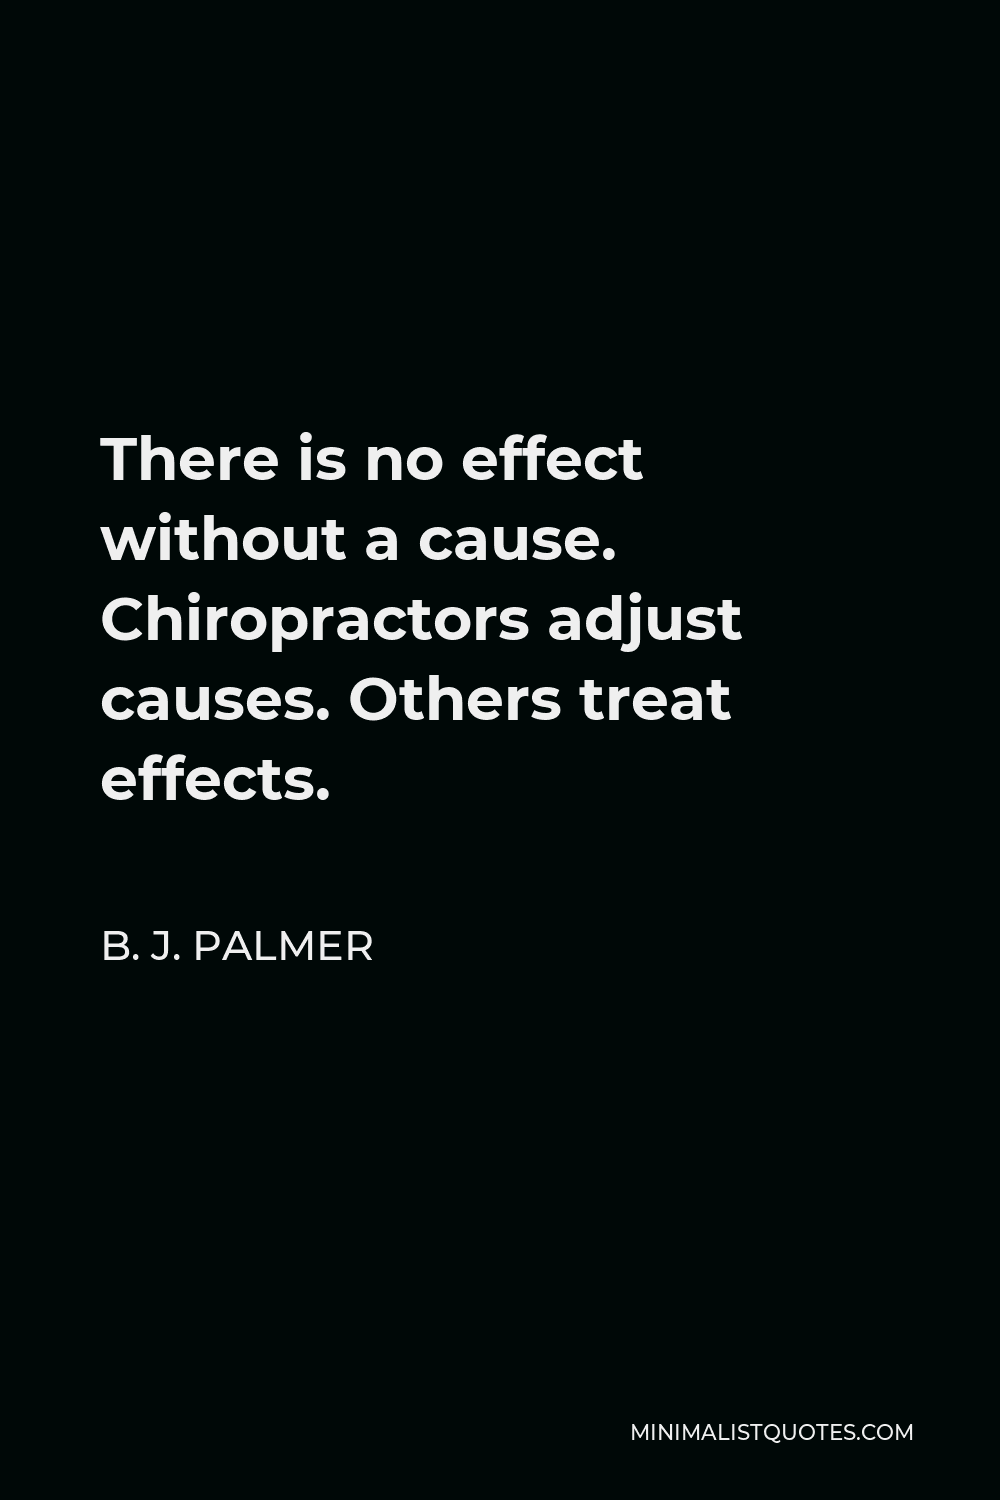 B. J. Palmer Quote - There is no effect without a cause. Chiropractors adjust causes. Others treat effects.